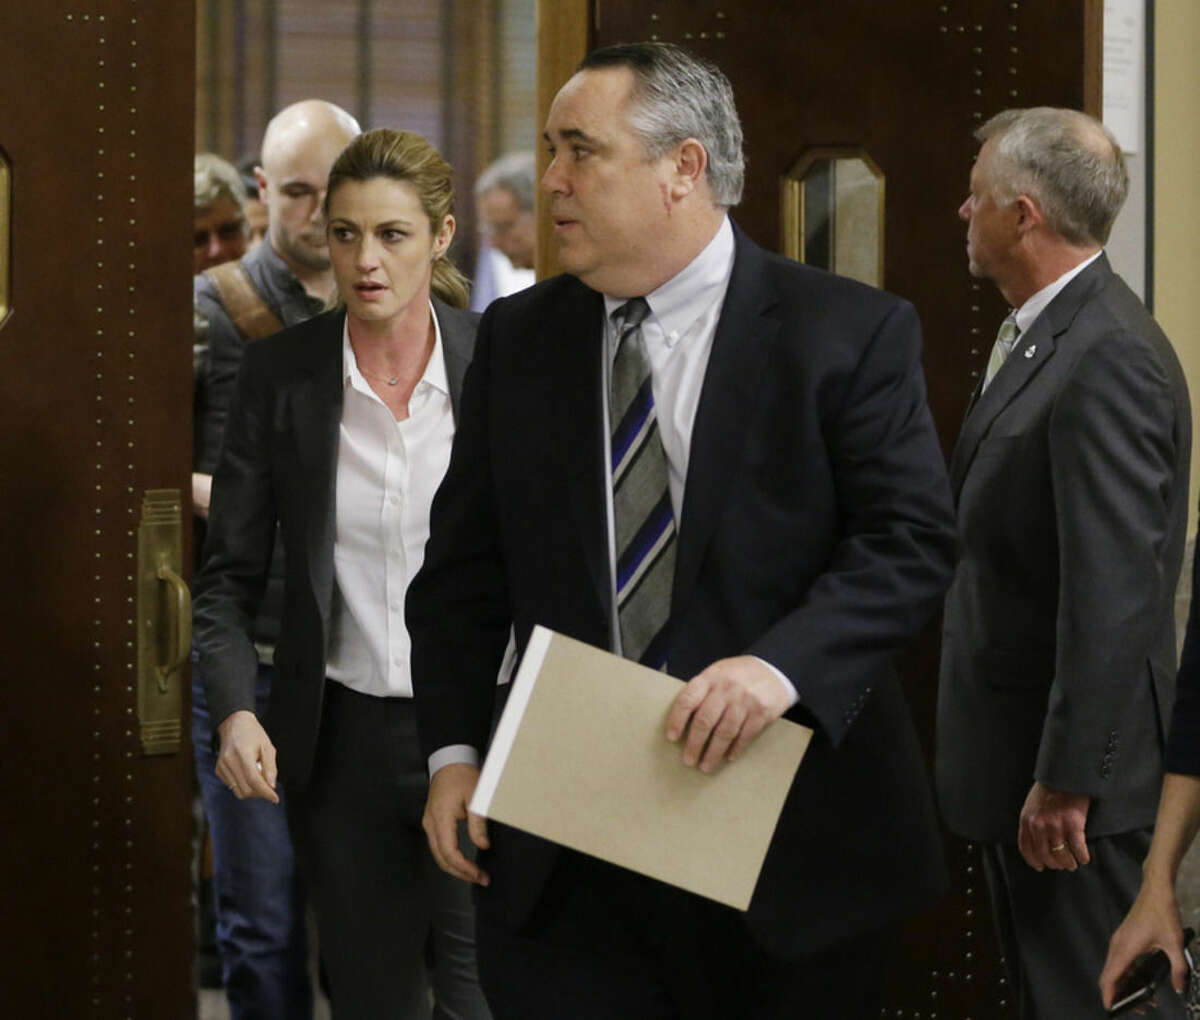 Sportscaster and television host Erin Andrews, left, leaves the courtroom with attorney Scott Carr, center, after the verdict was read in her lawsuit Monday, March 7, 2016, in Nashville, Tenn. A jury has awarded Andrews $55 million in her lawsuit against a stalker who bought a hotel room next to her and secretly recorded a nude video, finding that the hotel companies and the stalker shared in the blame. (AP Photo/Mark Humphrey)